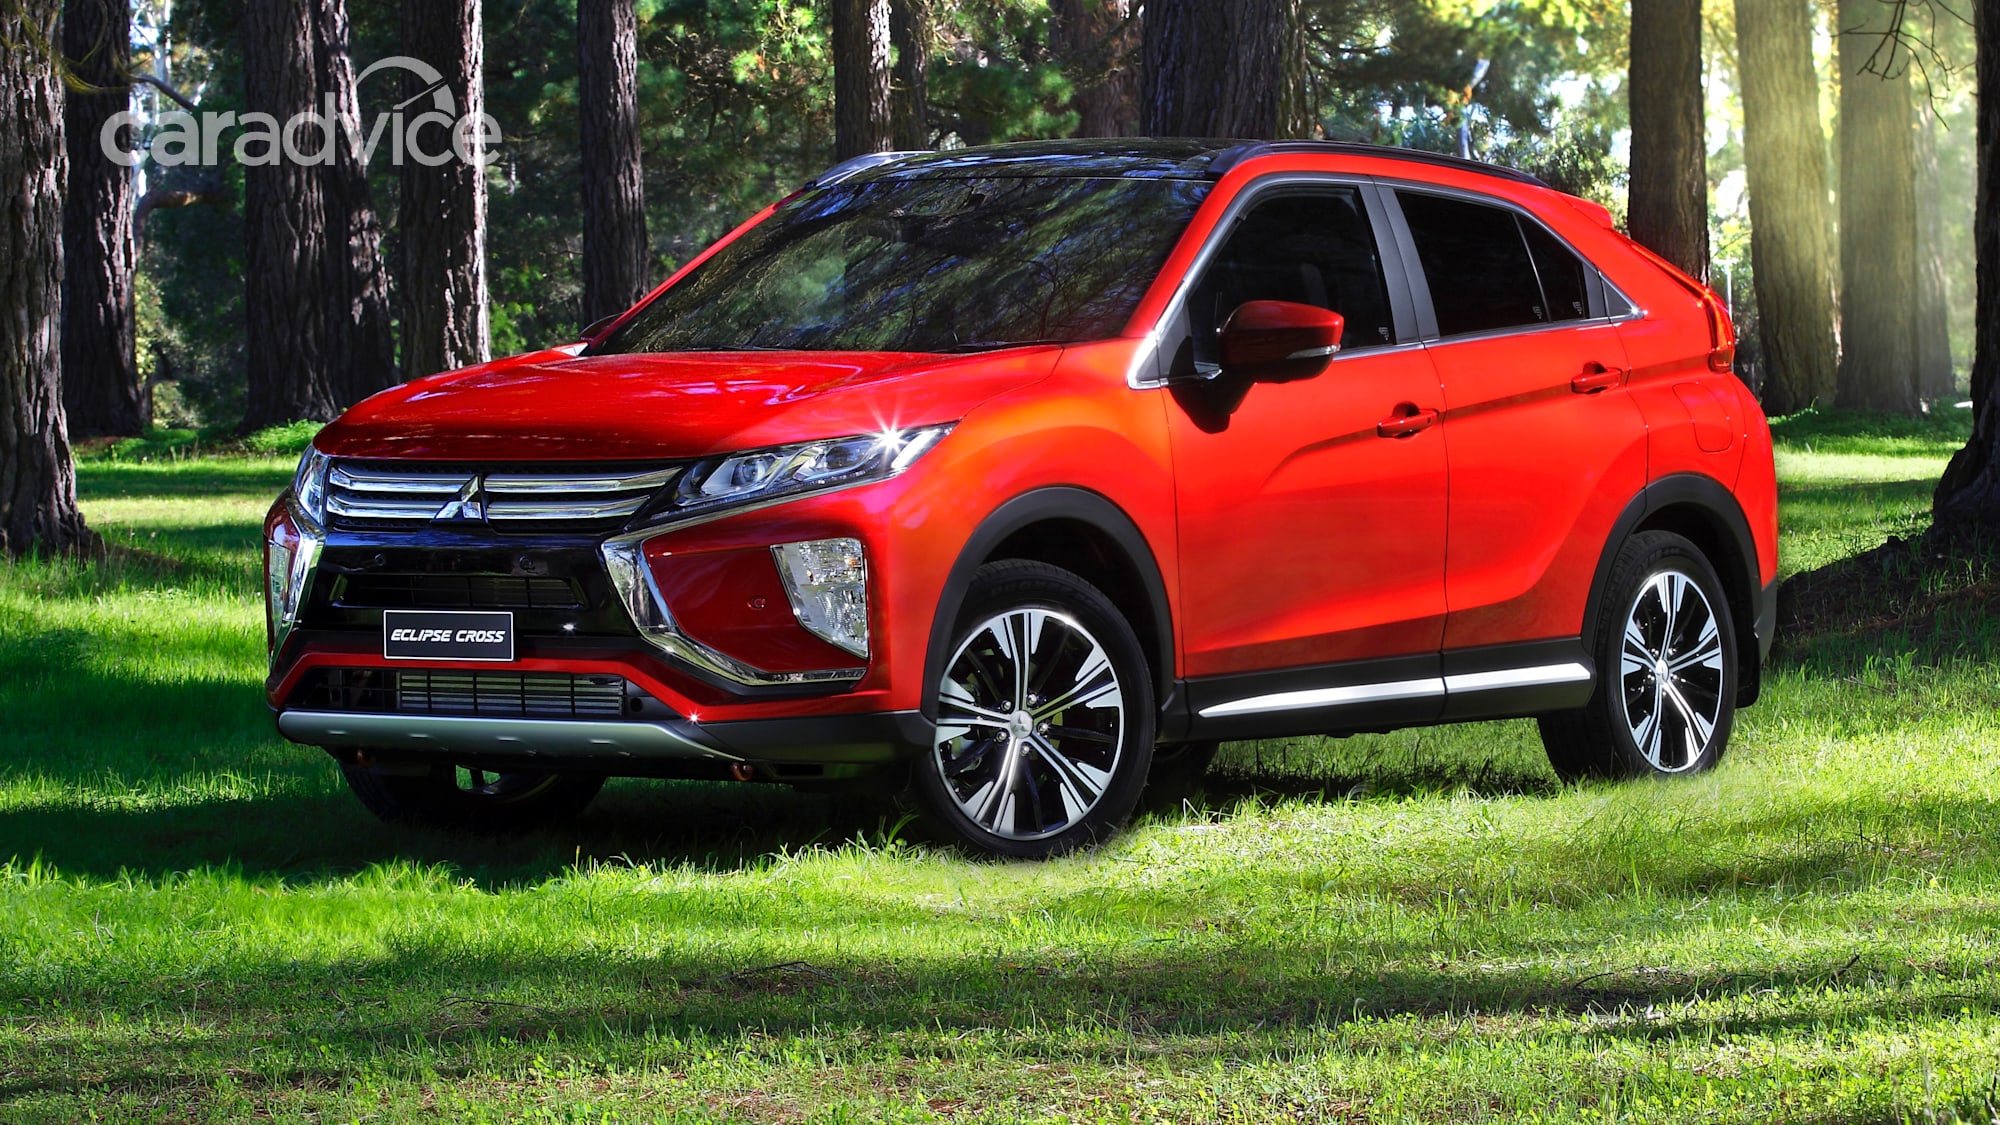 2021 Mitsubishi  Eclipse Cross facelift spied CarAdvice